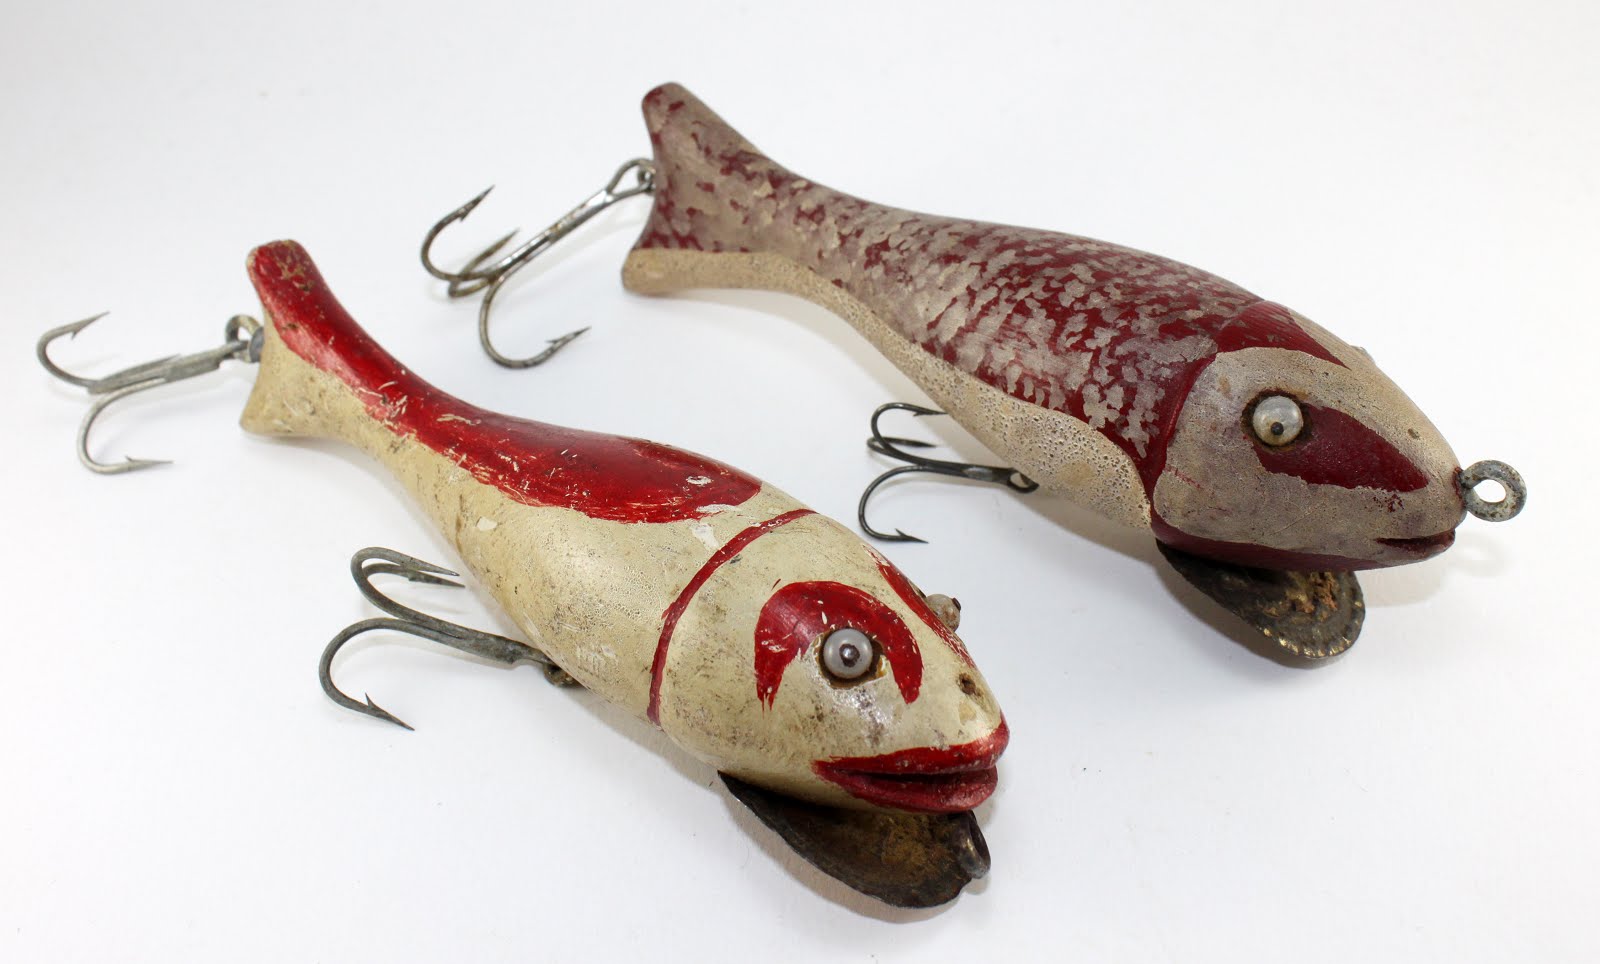 Chance's Folk Art Fishing Lure Research Blog: Intriguing Red and